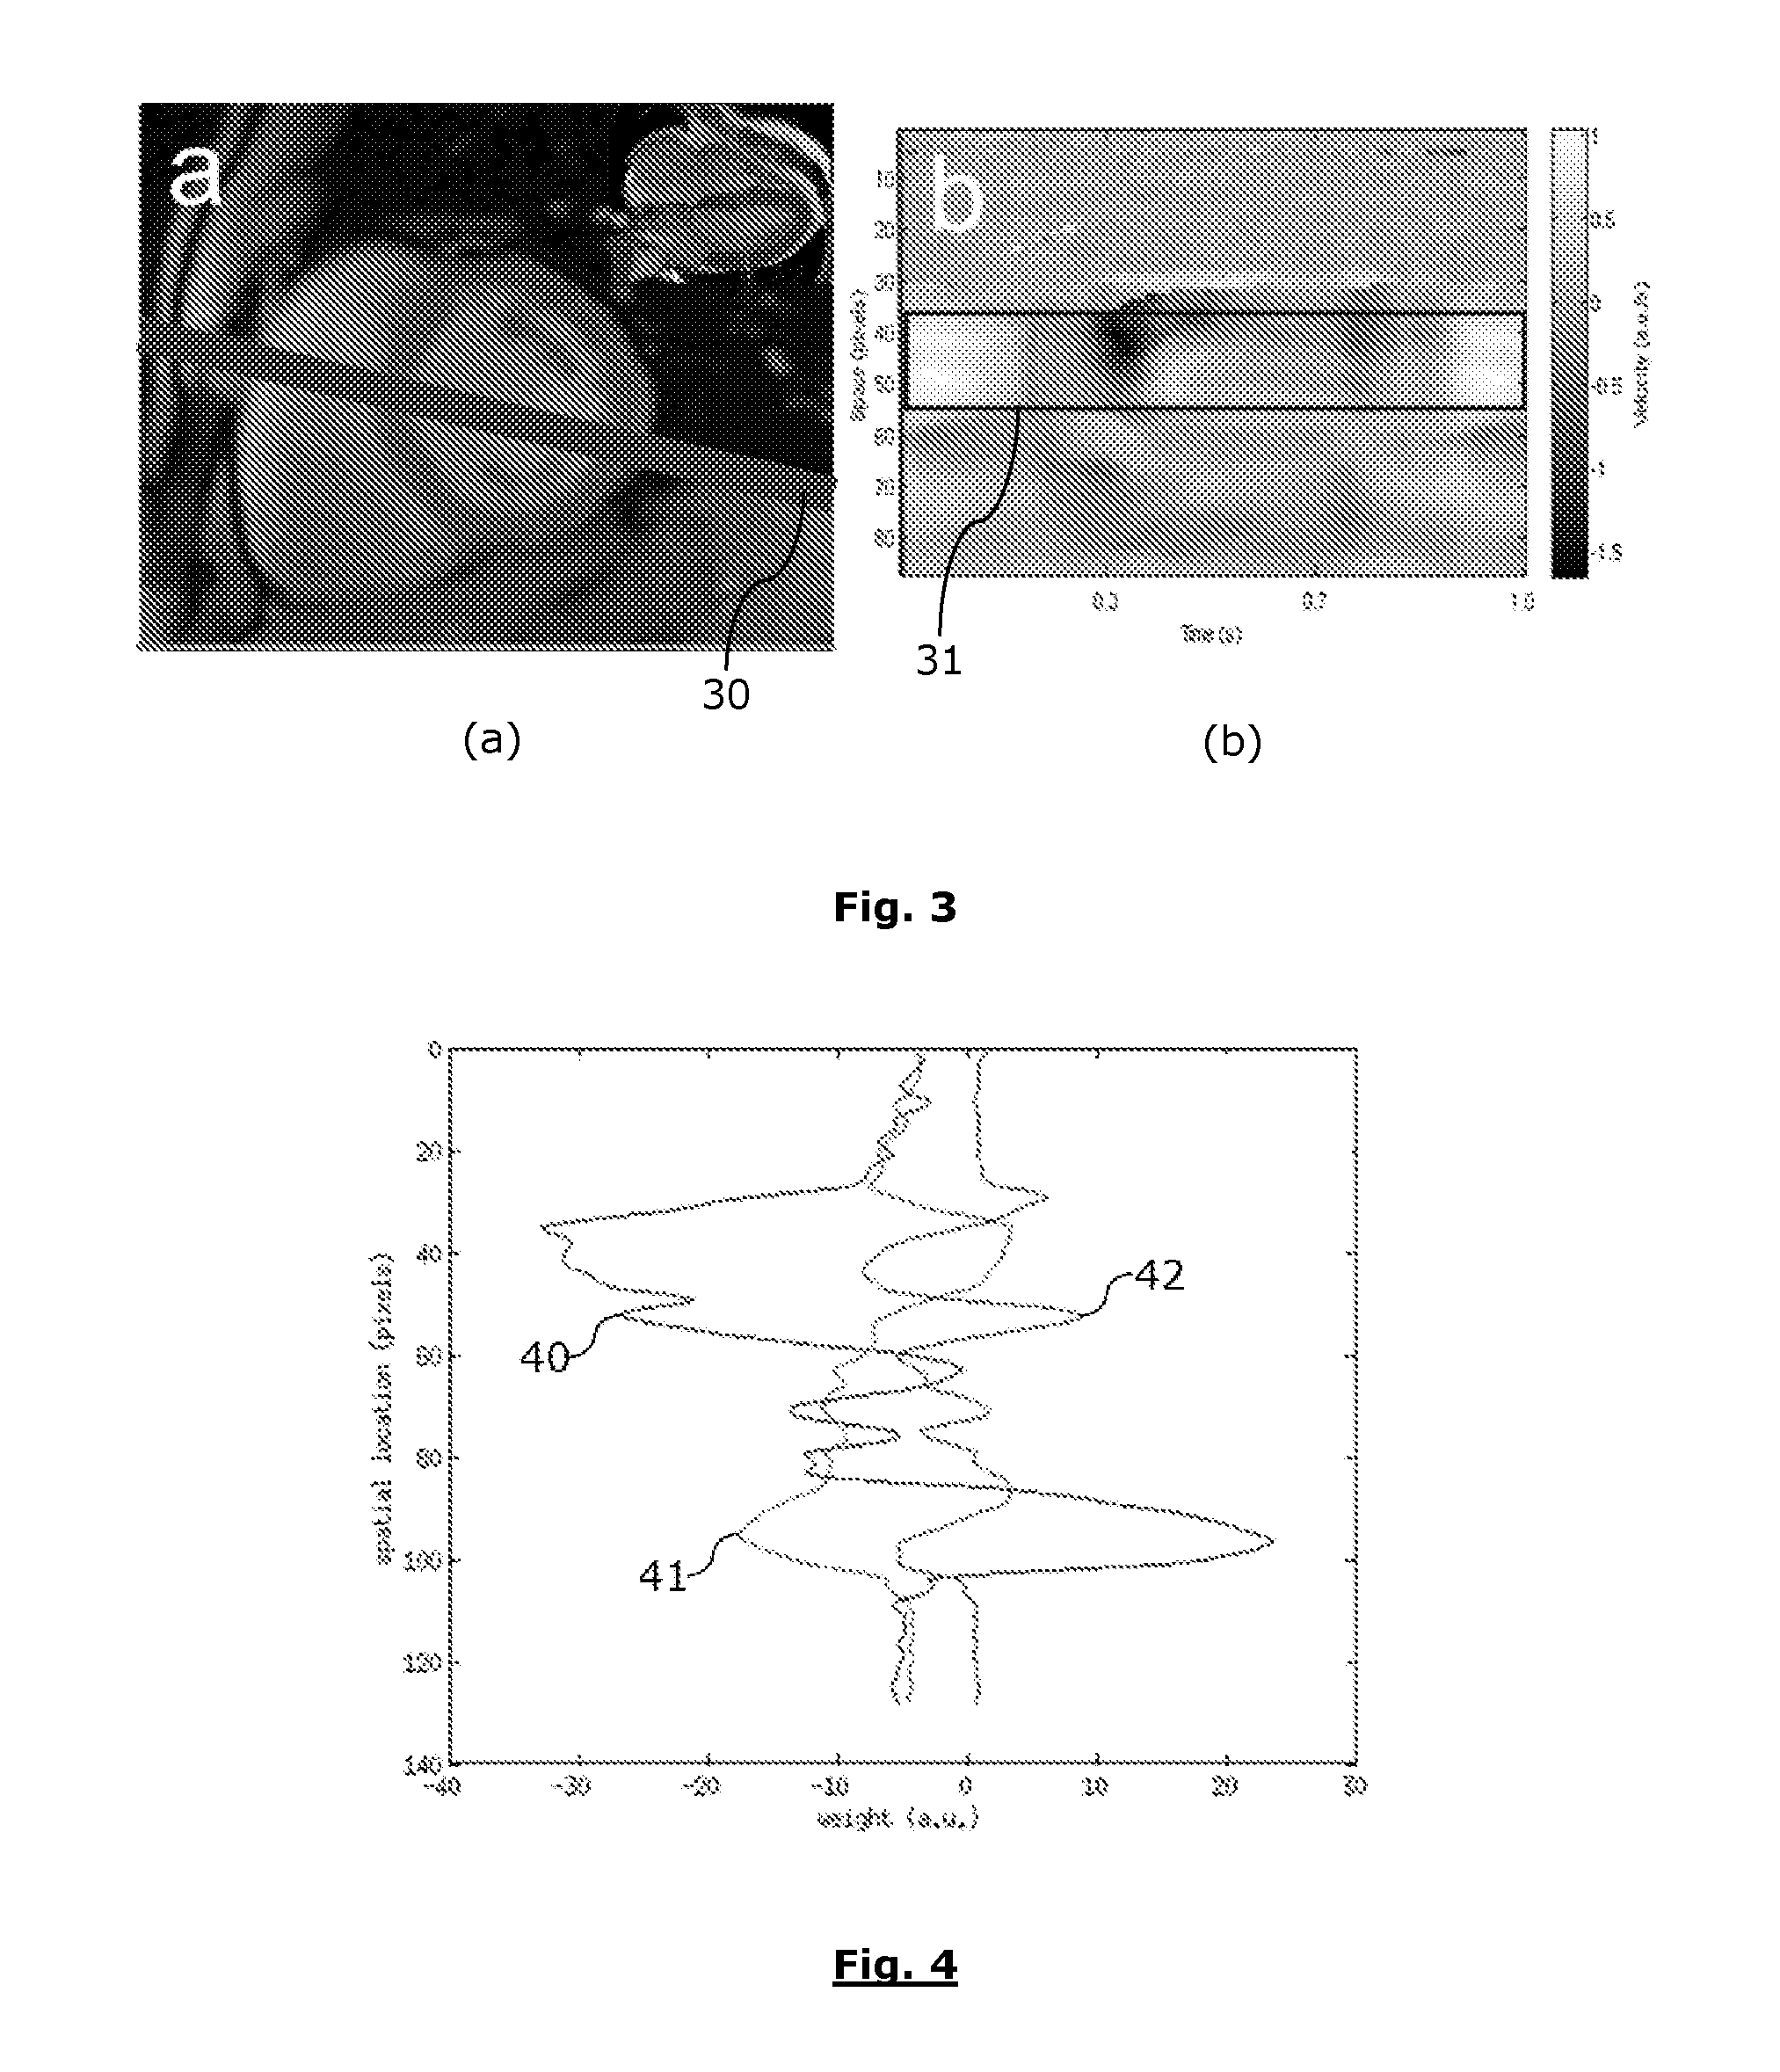 Method for determining a personalized cardiac model using a magnetic resonance imaging sequence